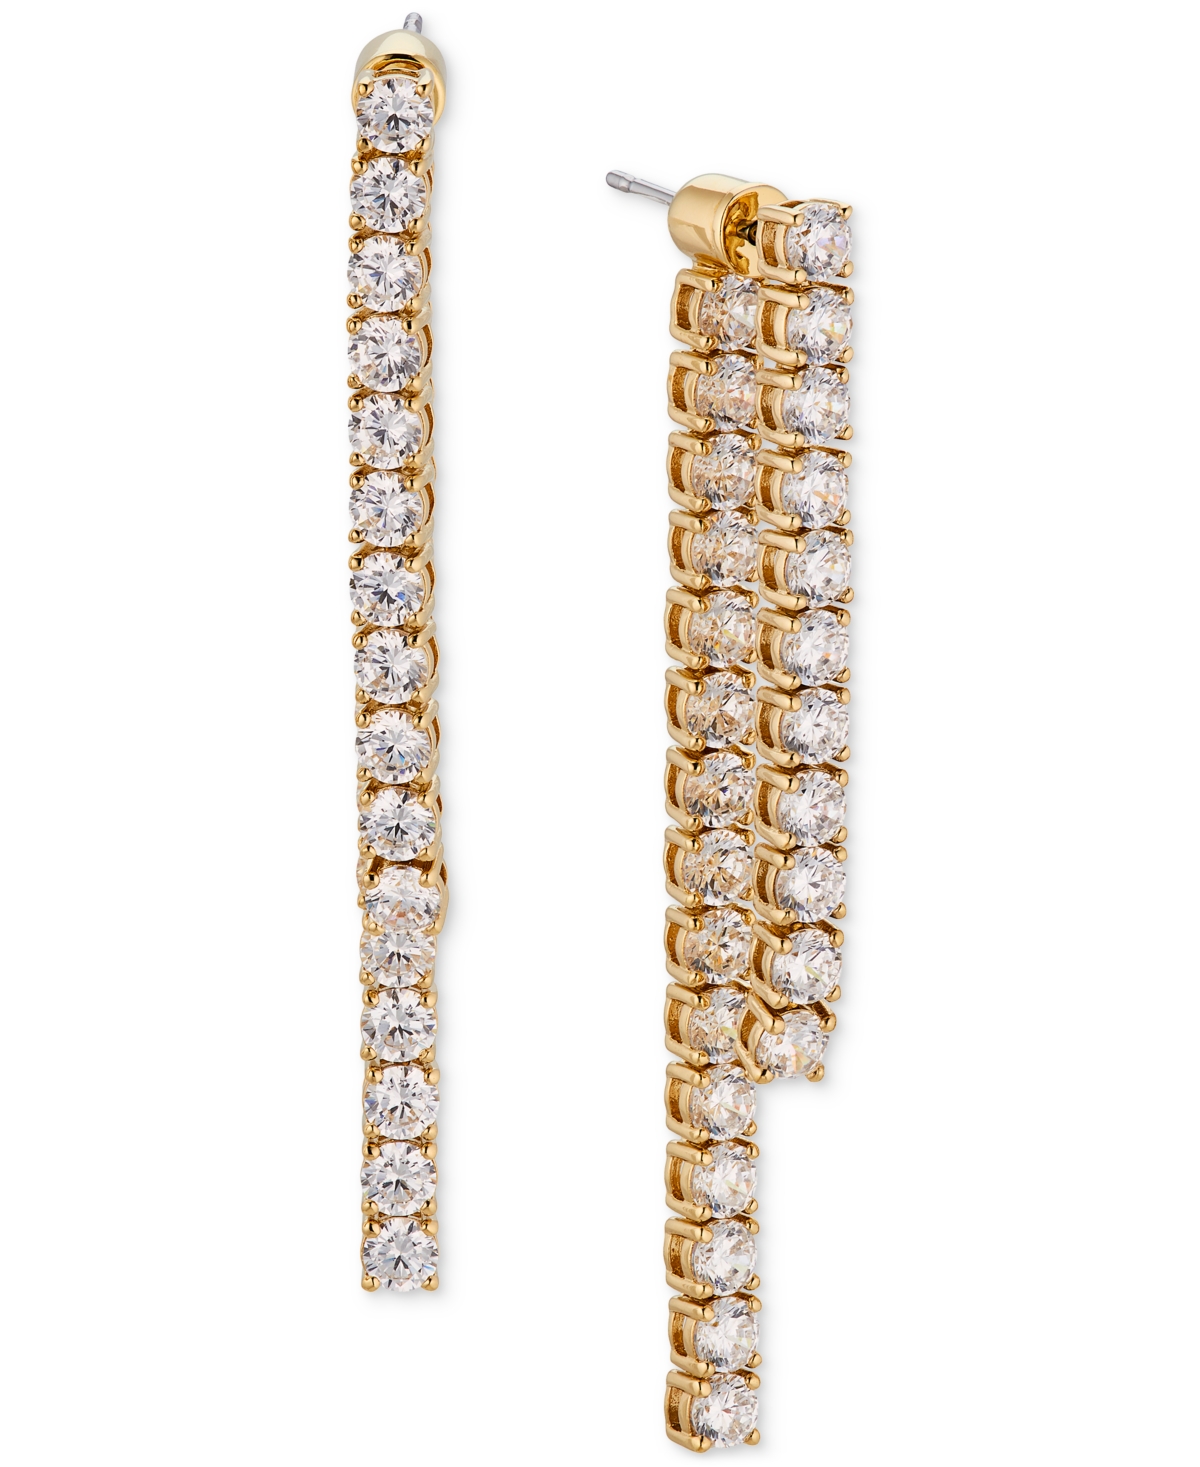 Silver-Tone Cubic Zirconia Front-to-Back Linear Drop Earrings, Created for Macy's - Gold